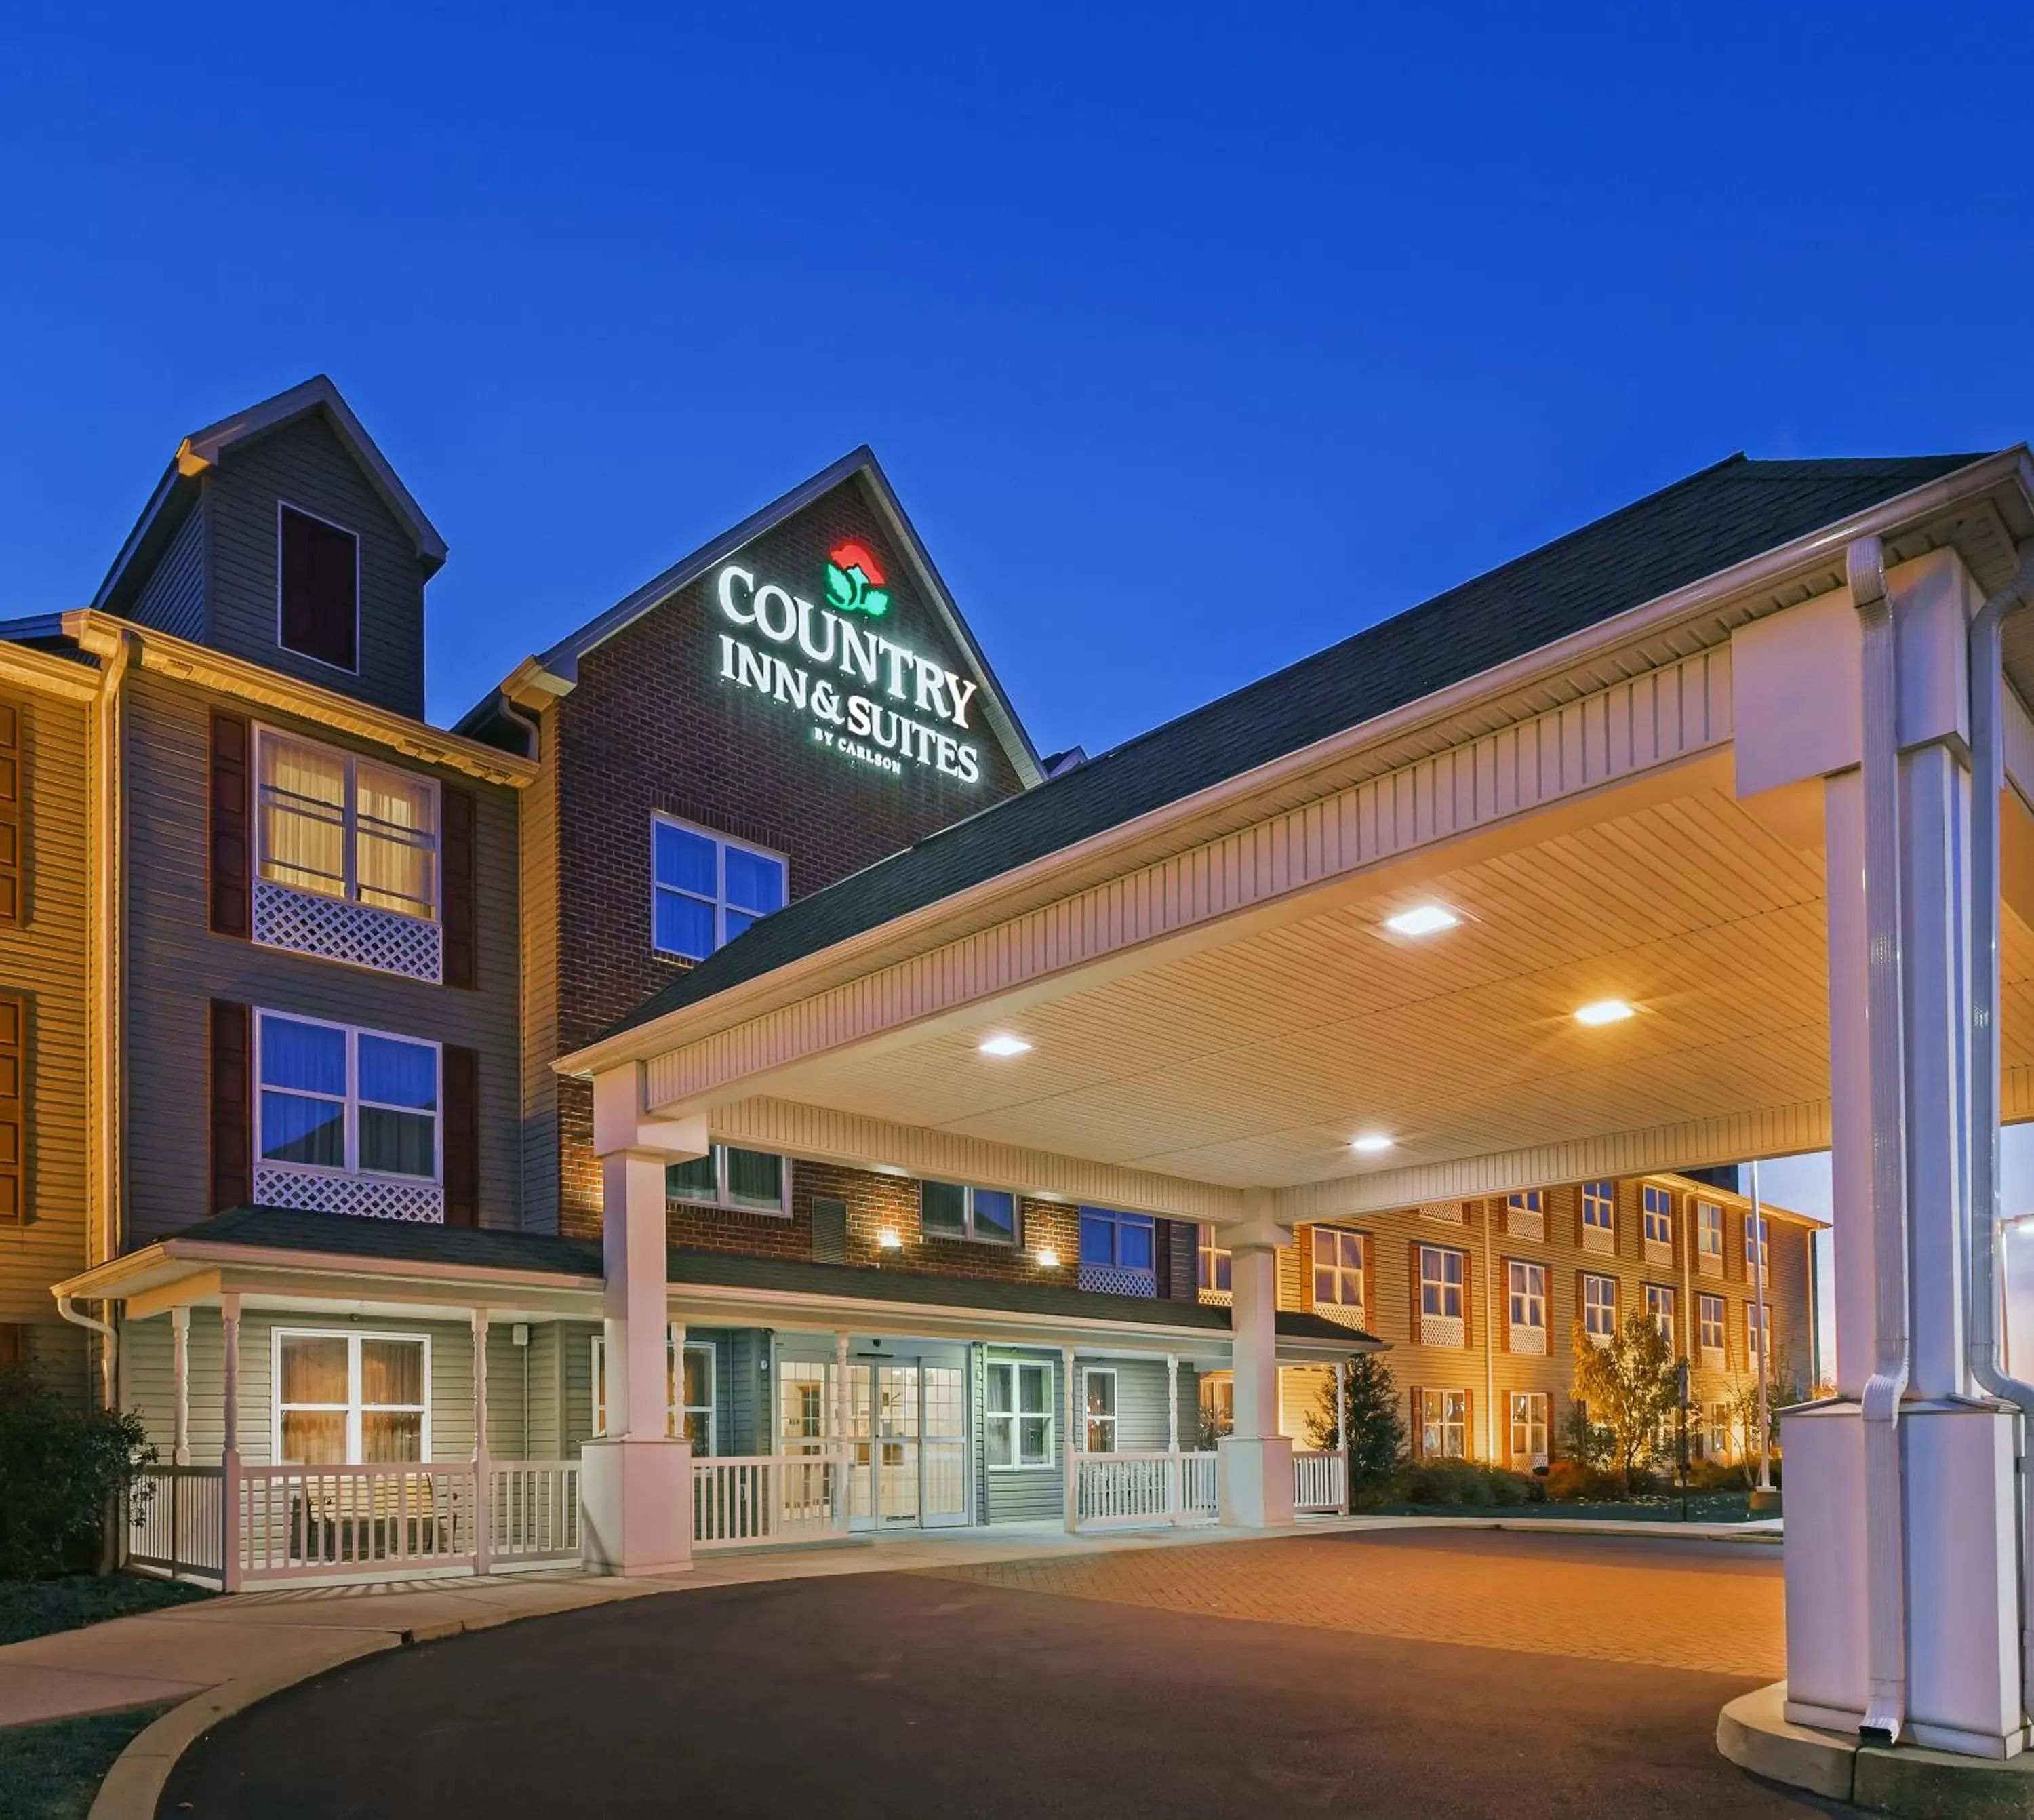 Facade/entrance, Property Building in Country Inn & Suites by Radisson, Chambersburg, PA